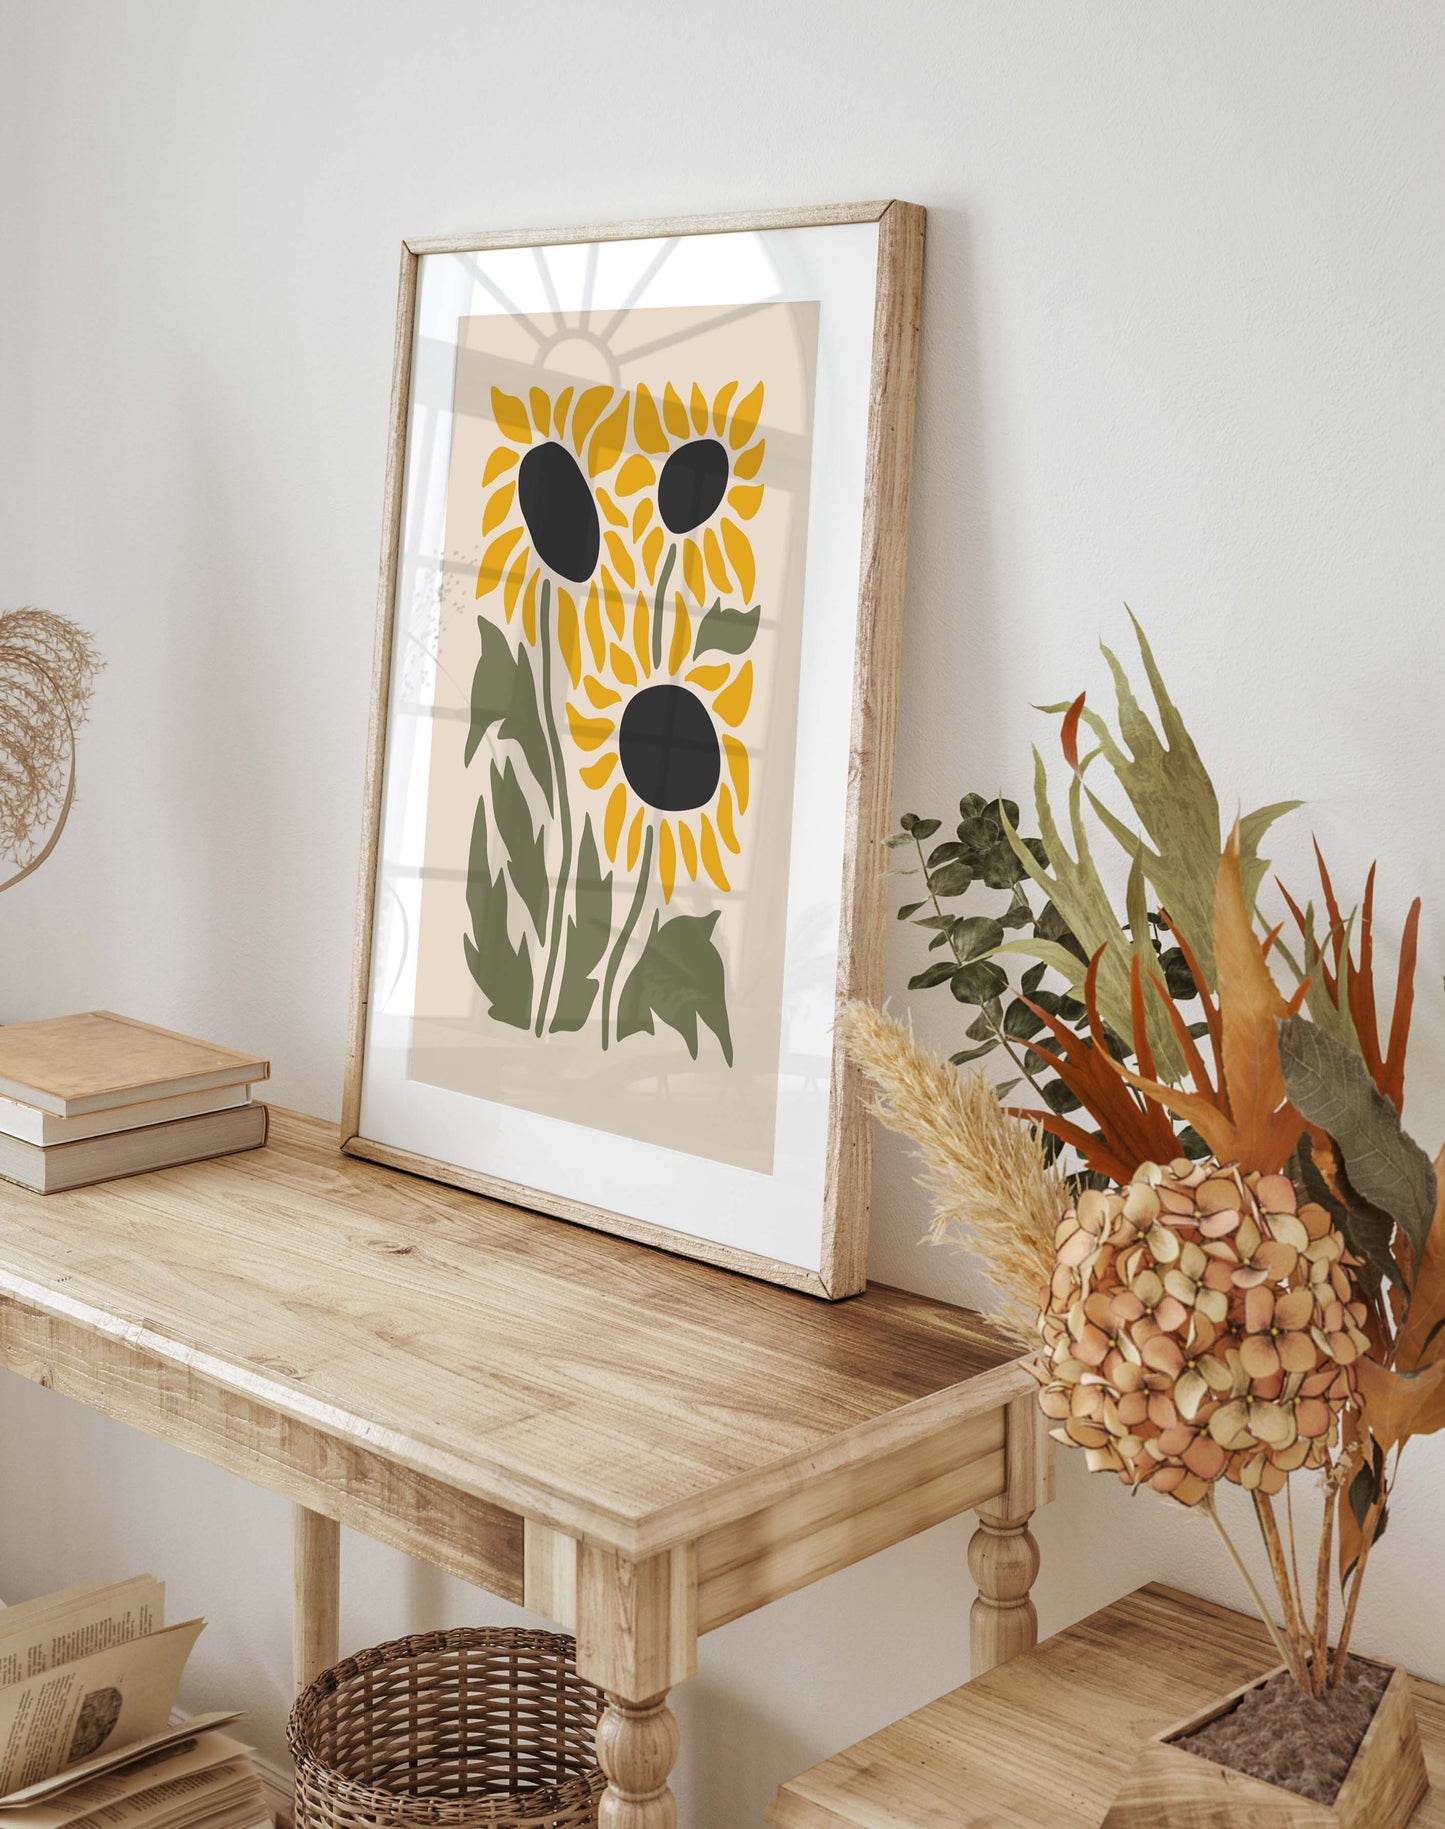 Sunflower wall art print in a simple minimalist style